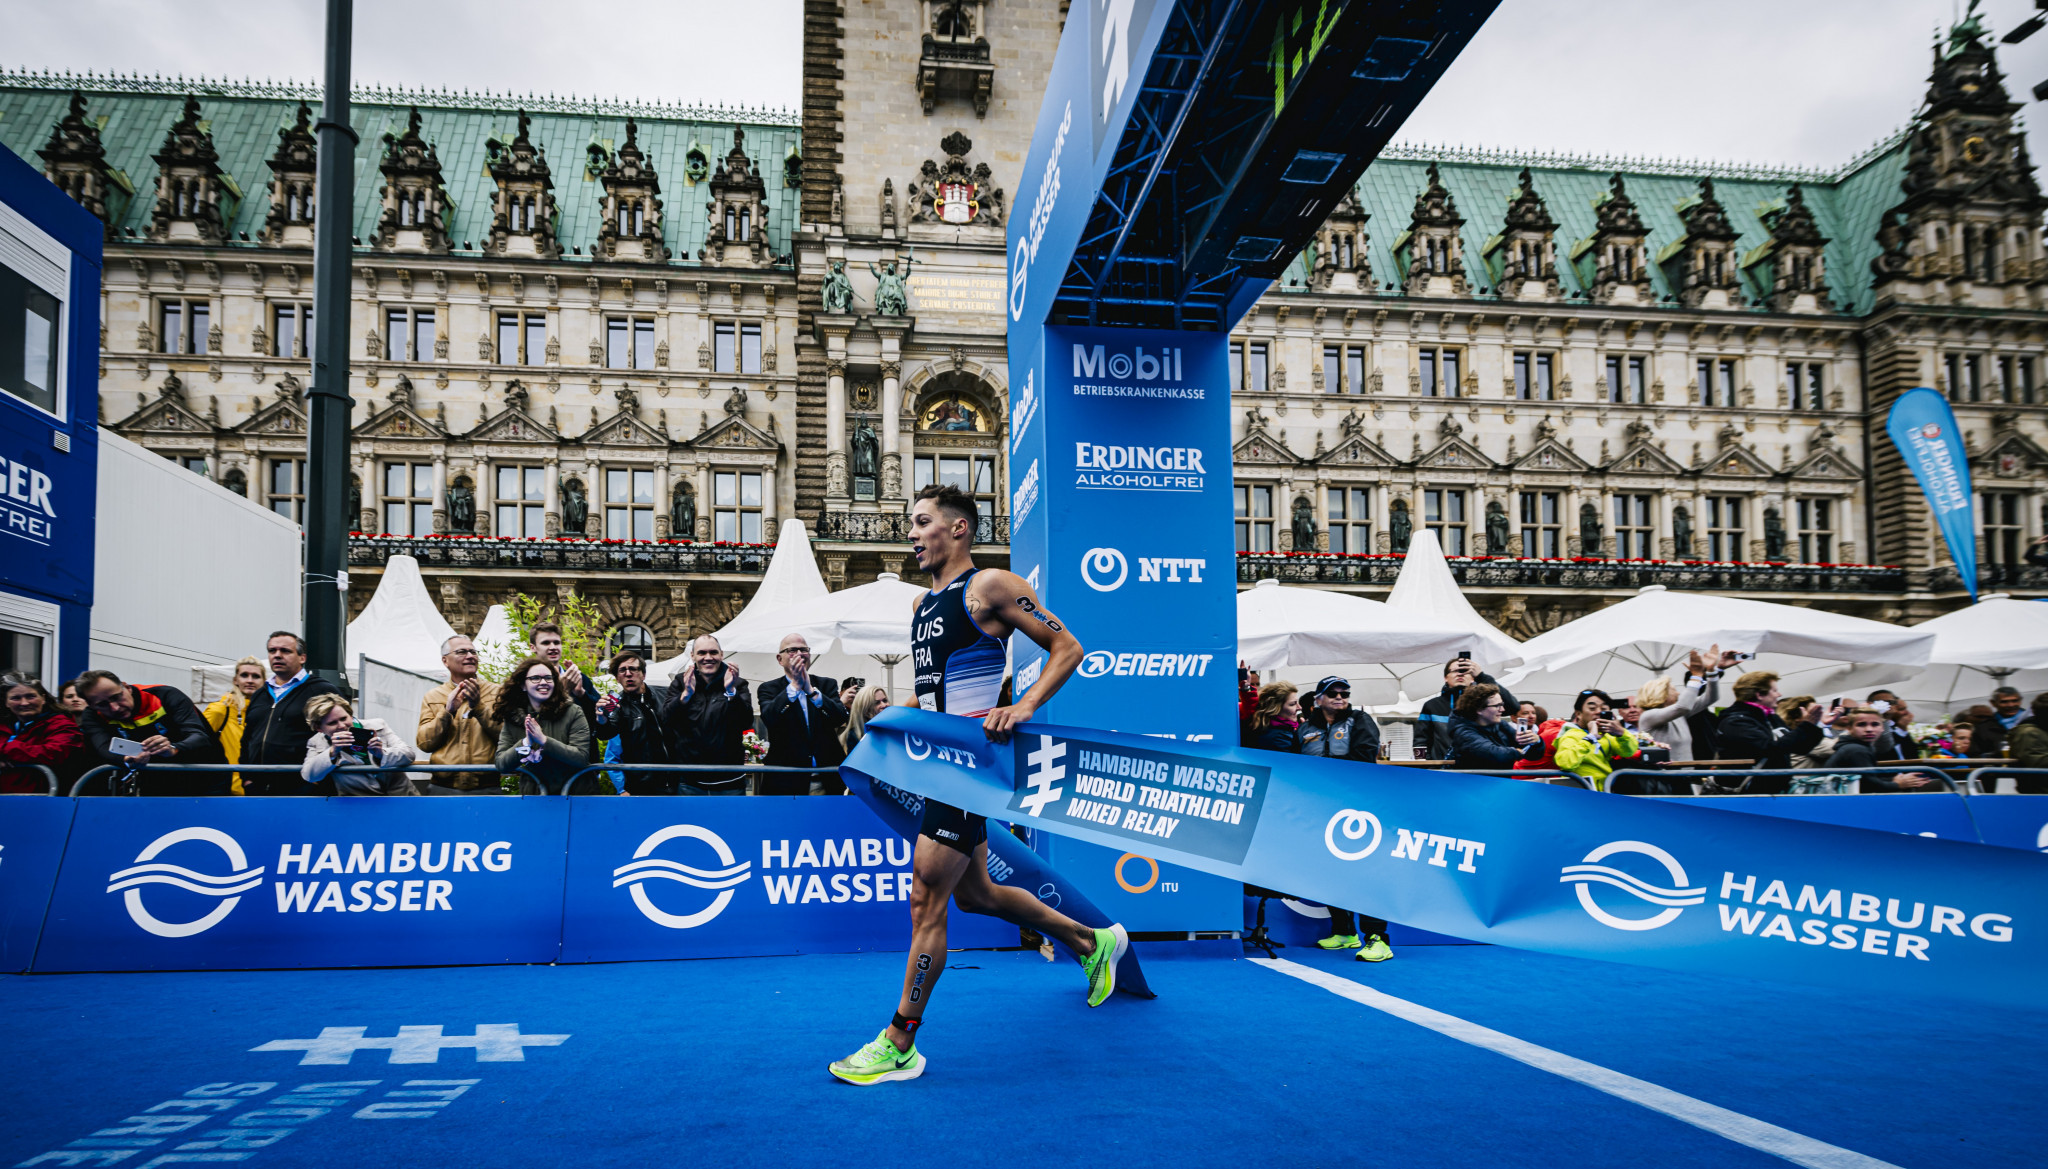 All events on the 2020 World Triathlon Series calendar have been postponed because of the global coronavirus pandemic ©Getty Images